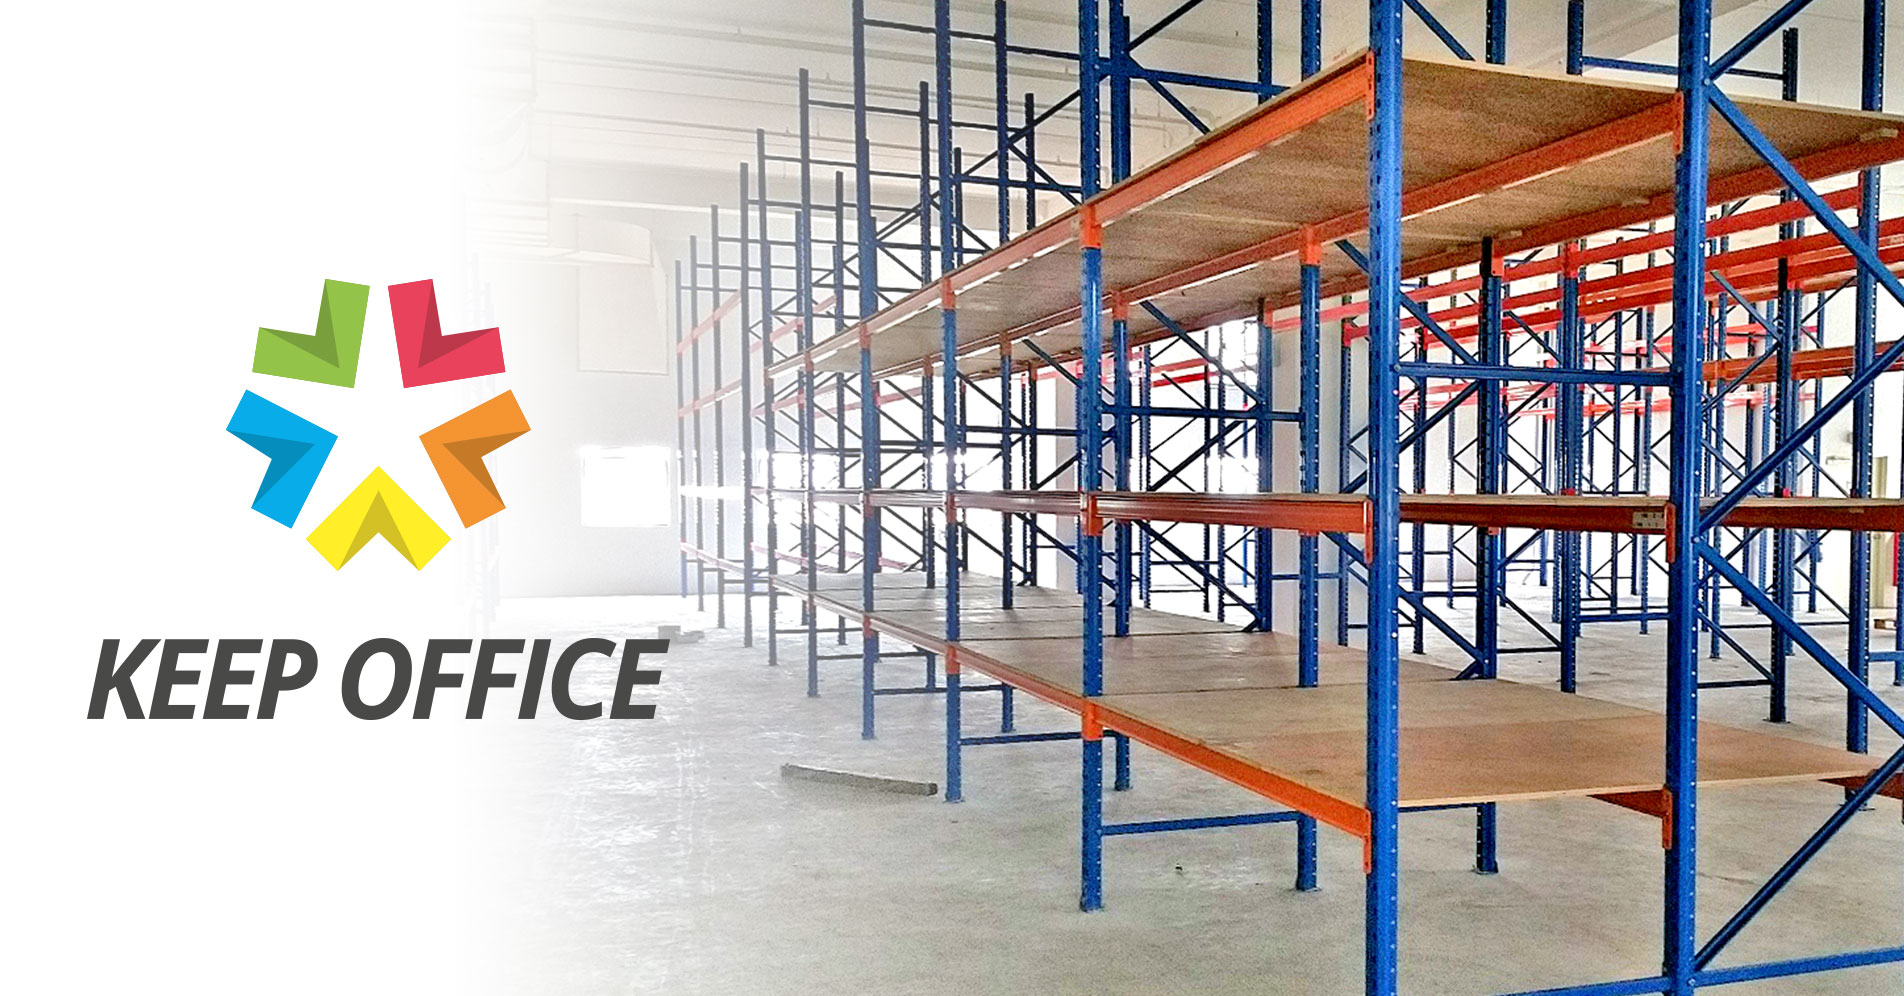 Keep Office Office Warehouse Shelving & Racking System